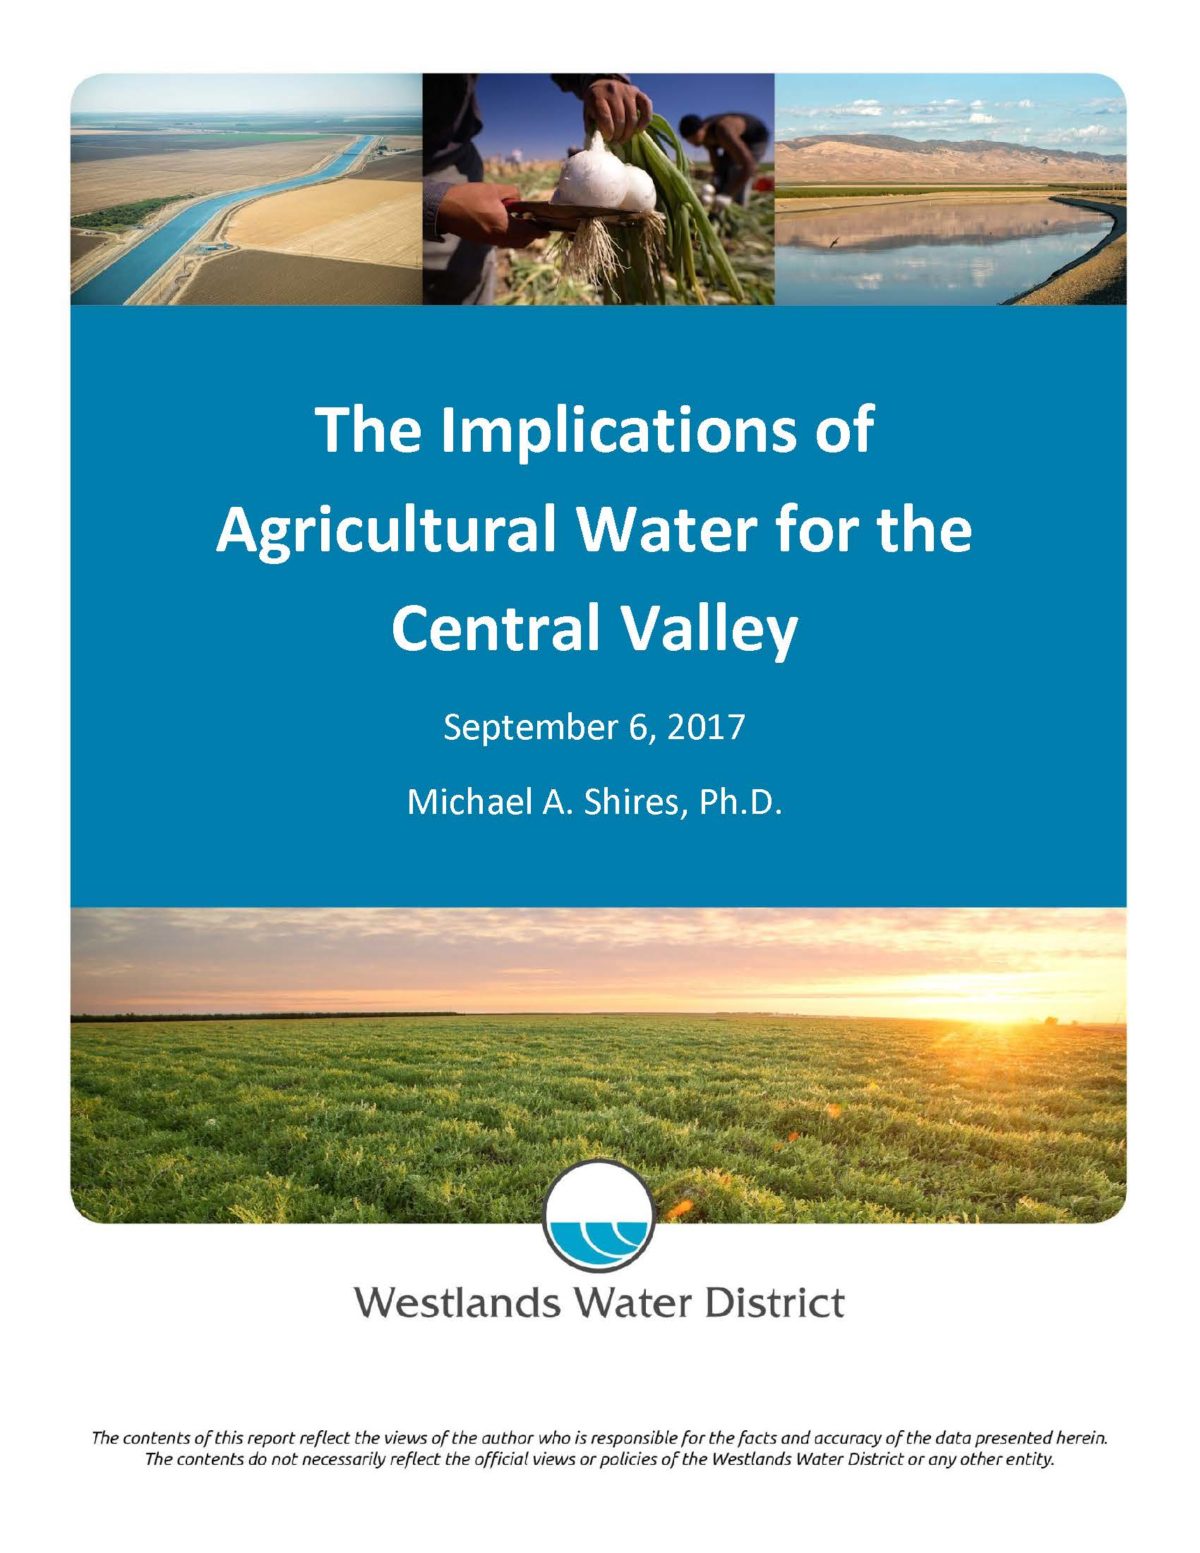 The Implications of Agricultural Water for the Central Valley